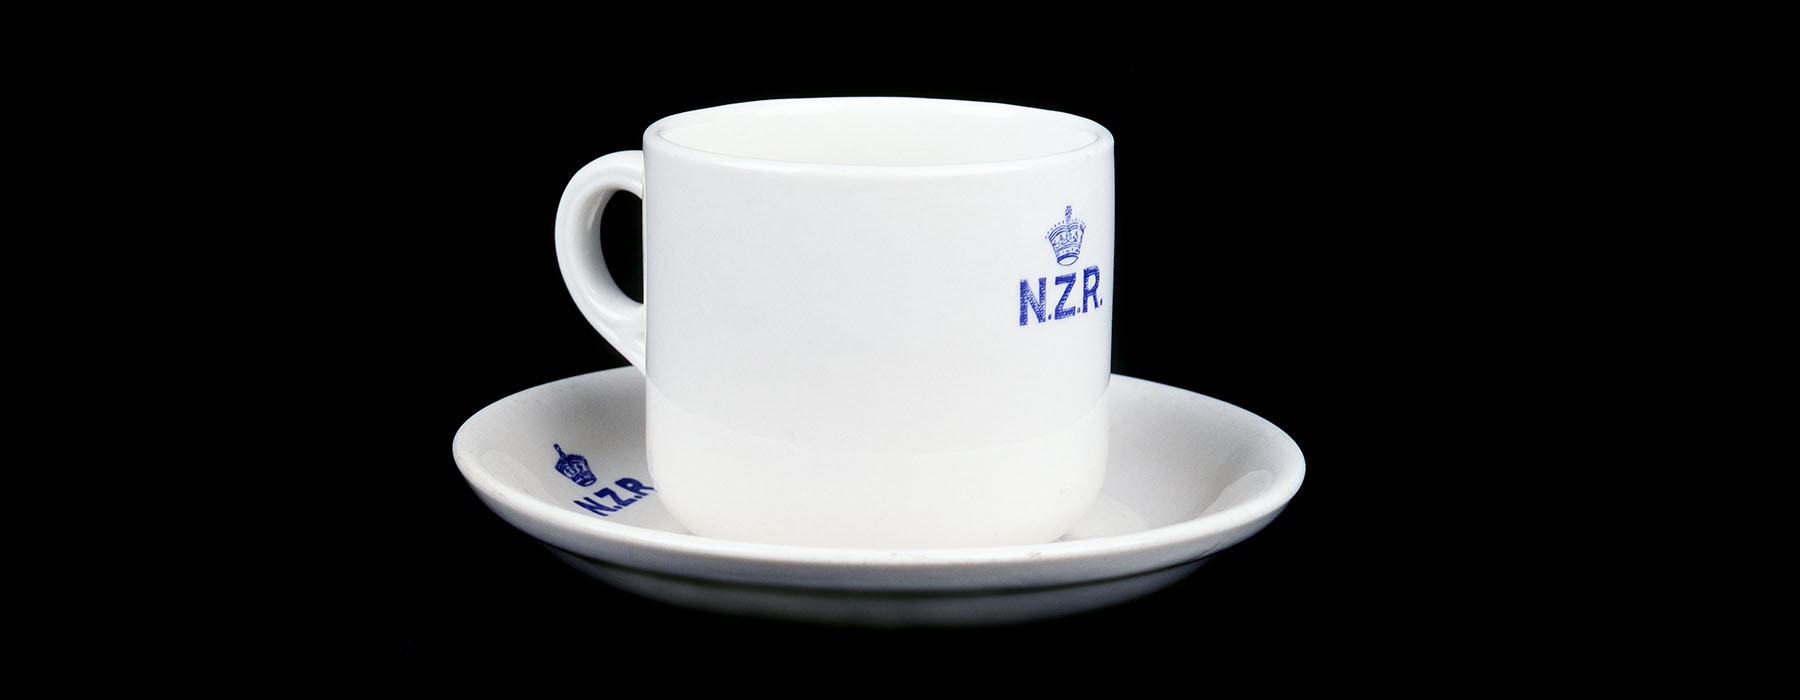 Cup and saucer, 1955, New Zealand, by Crown Lynn Potteries Ltd. CC BY-NC-ND licence. Te Papa (CG001384)